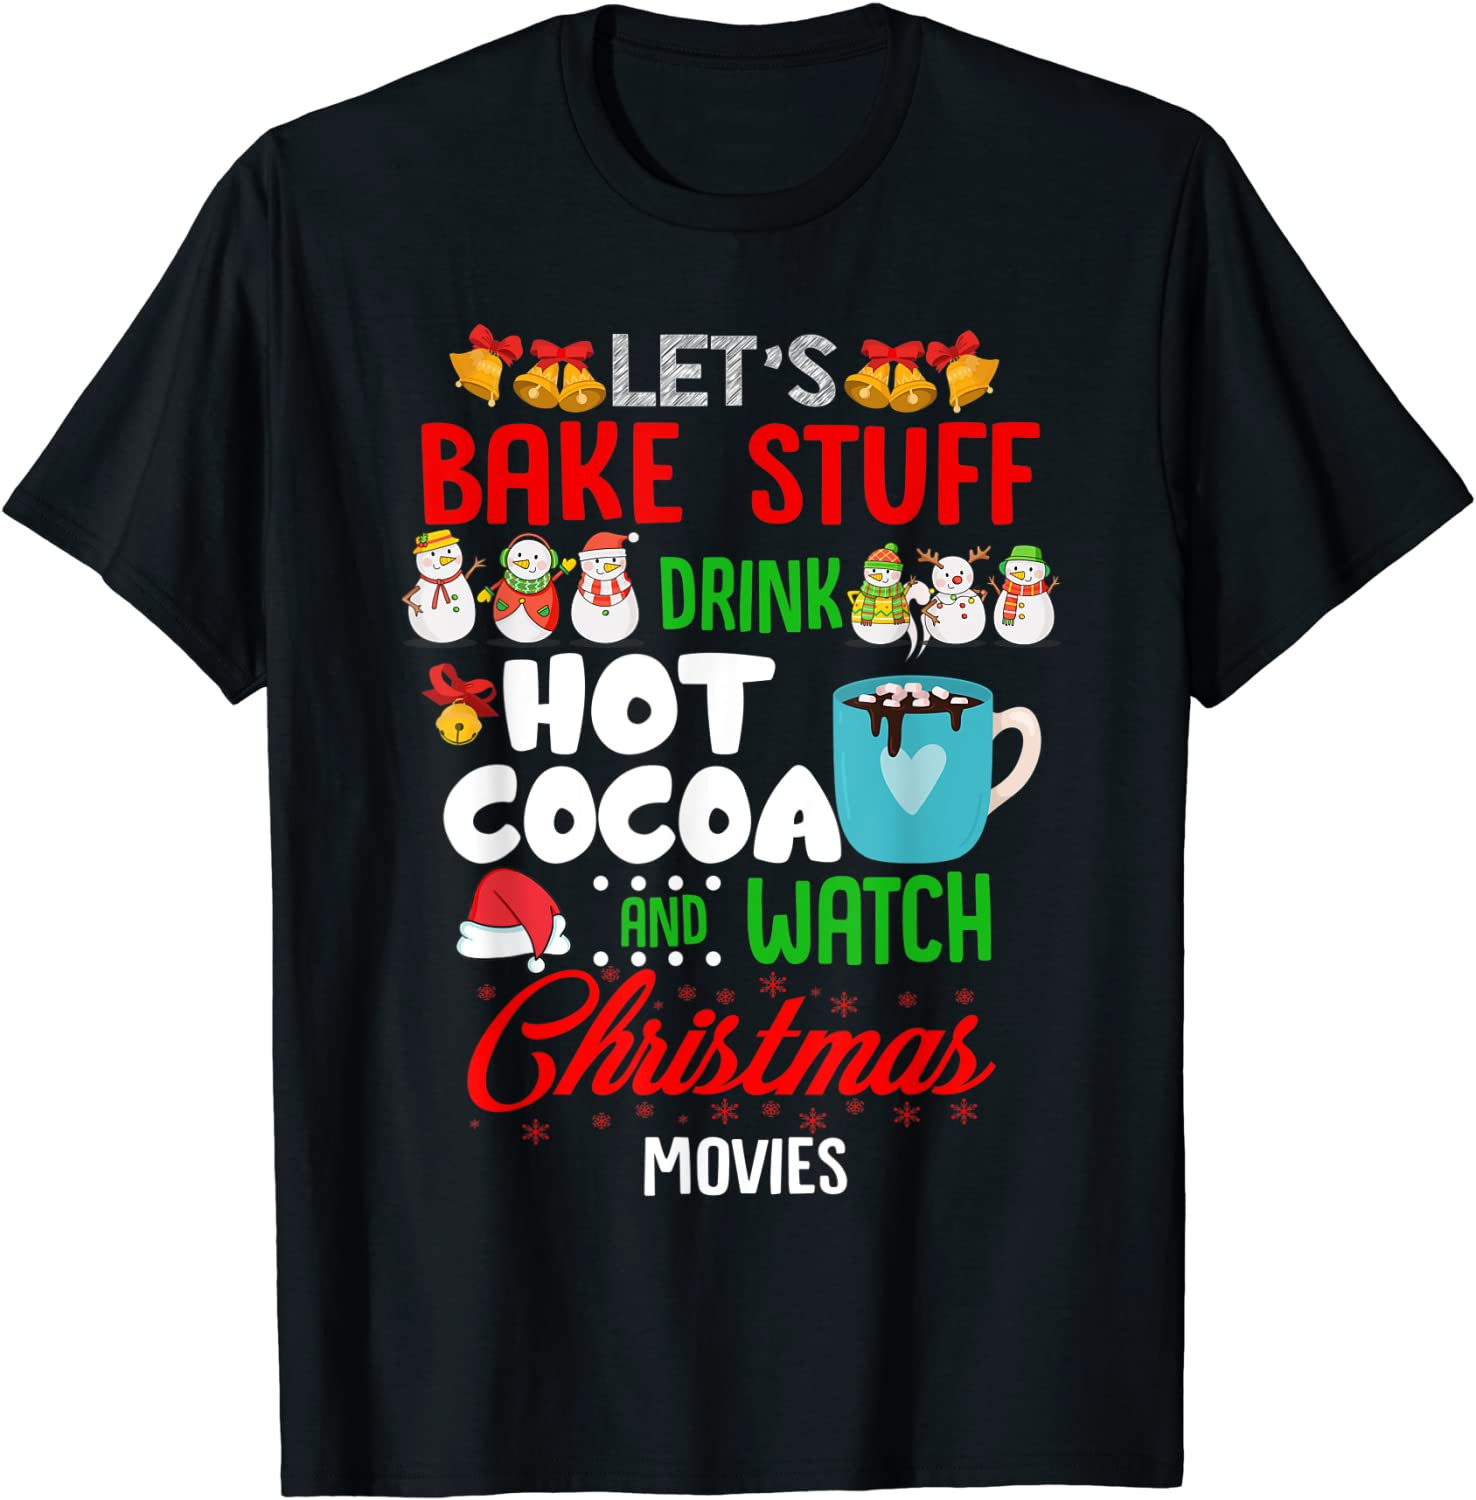 Let's Bake Stuff Drink Hot Cocoa And Watch Christmas Movies T-Shirt